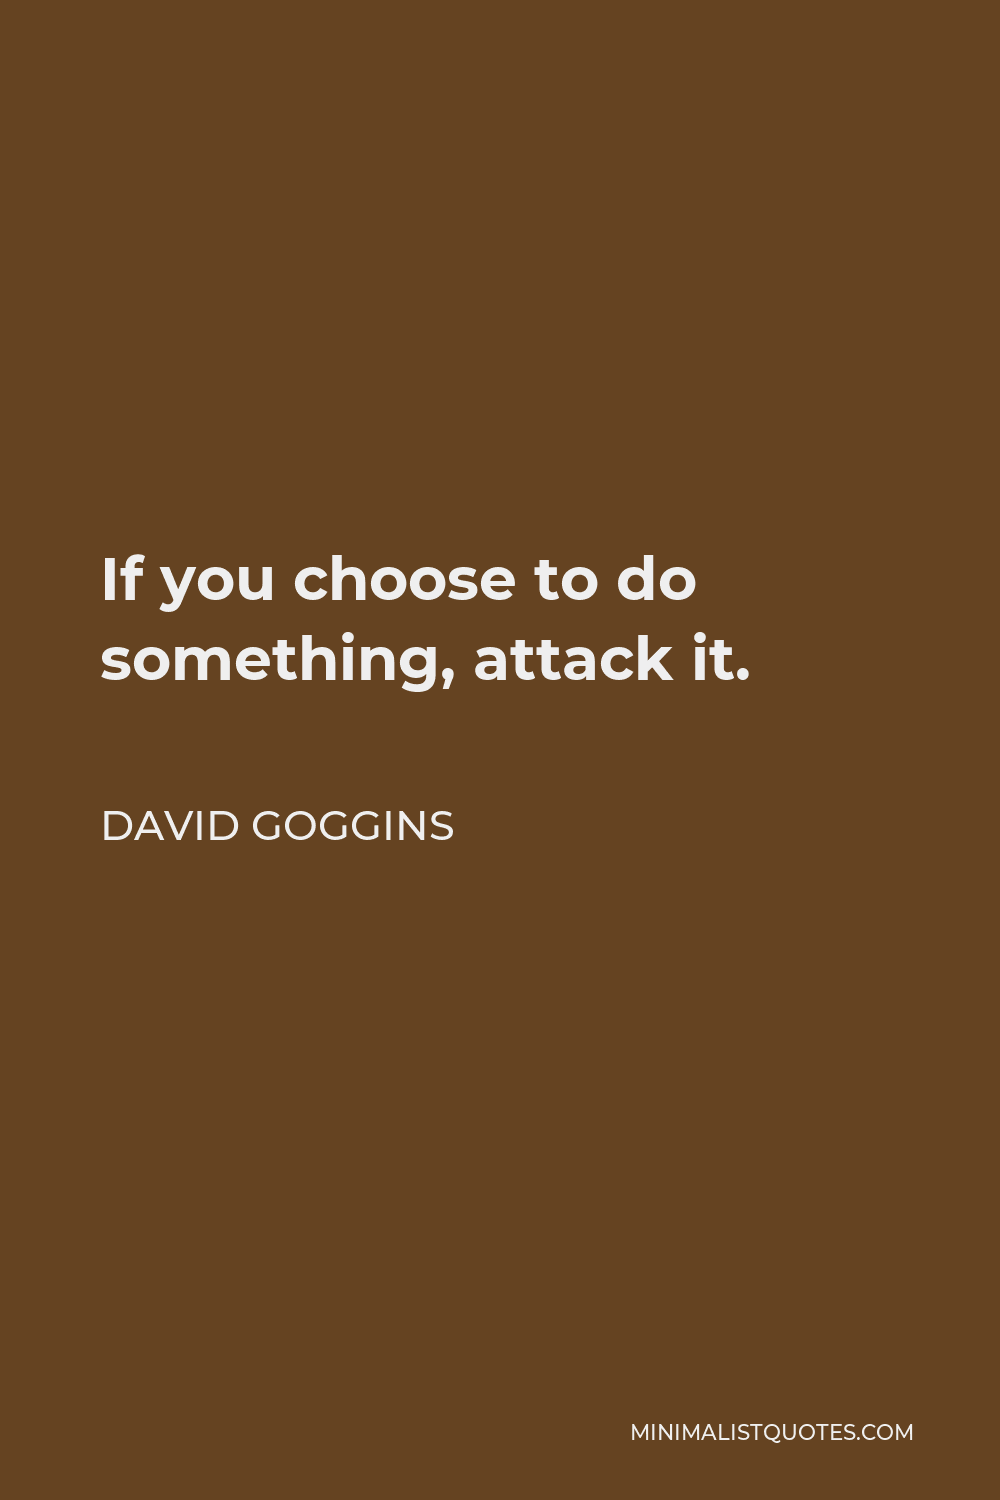 David Goggins Quote - If you choose to do something, attack it.